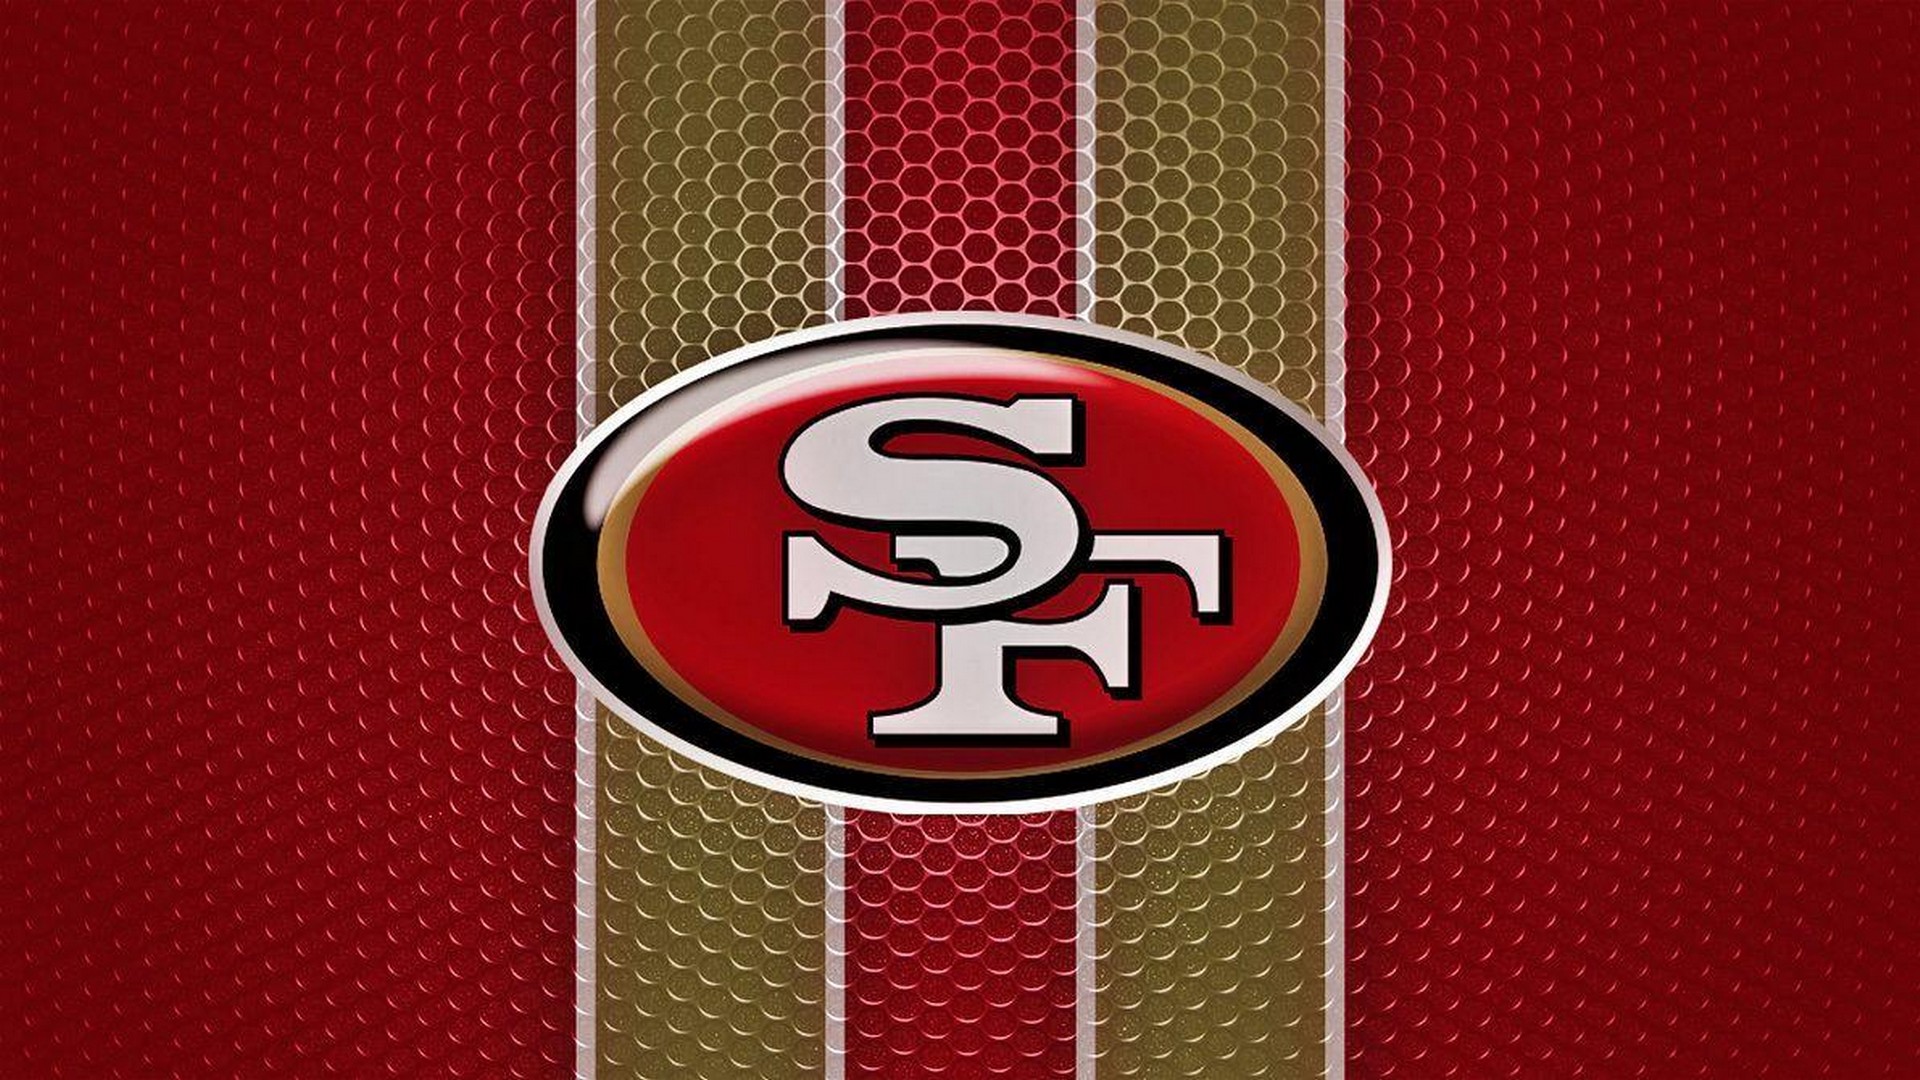 San Francisco 49ers HD Wallpapers With high-resolution 1920X1080 pixel. You can use this wallpaper for your Mac or Windows Desktop Background, iPhone, Android or Tablet and another Smartphone device